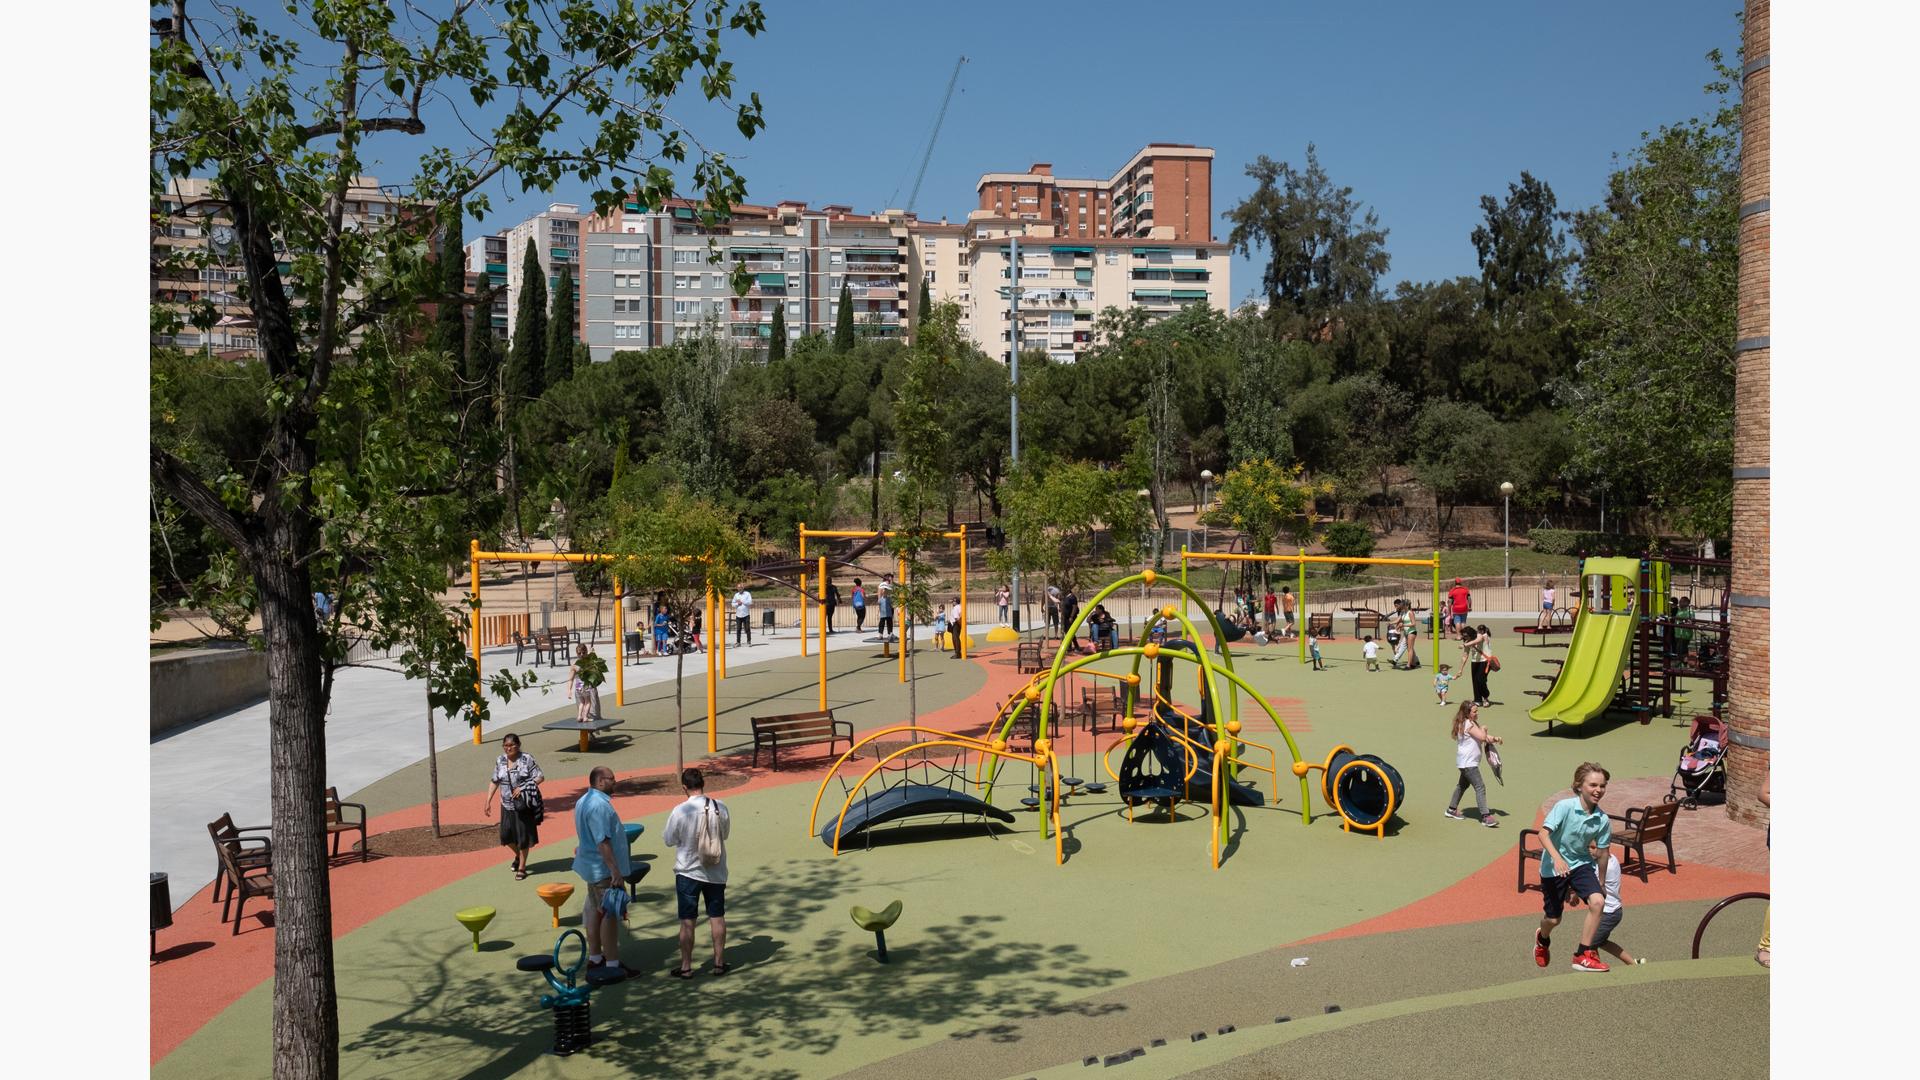 Full view of a large open play area with inclusive safety surfacing with multiple play structures for all ages along with a zip line and swing set area.